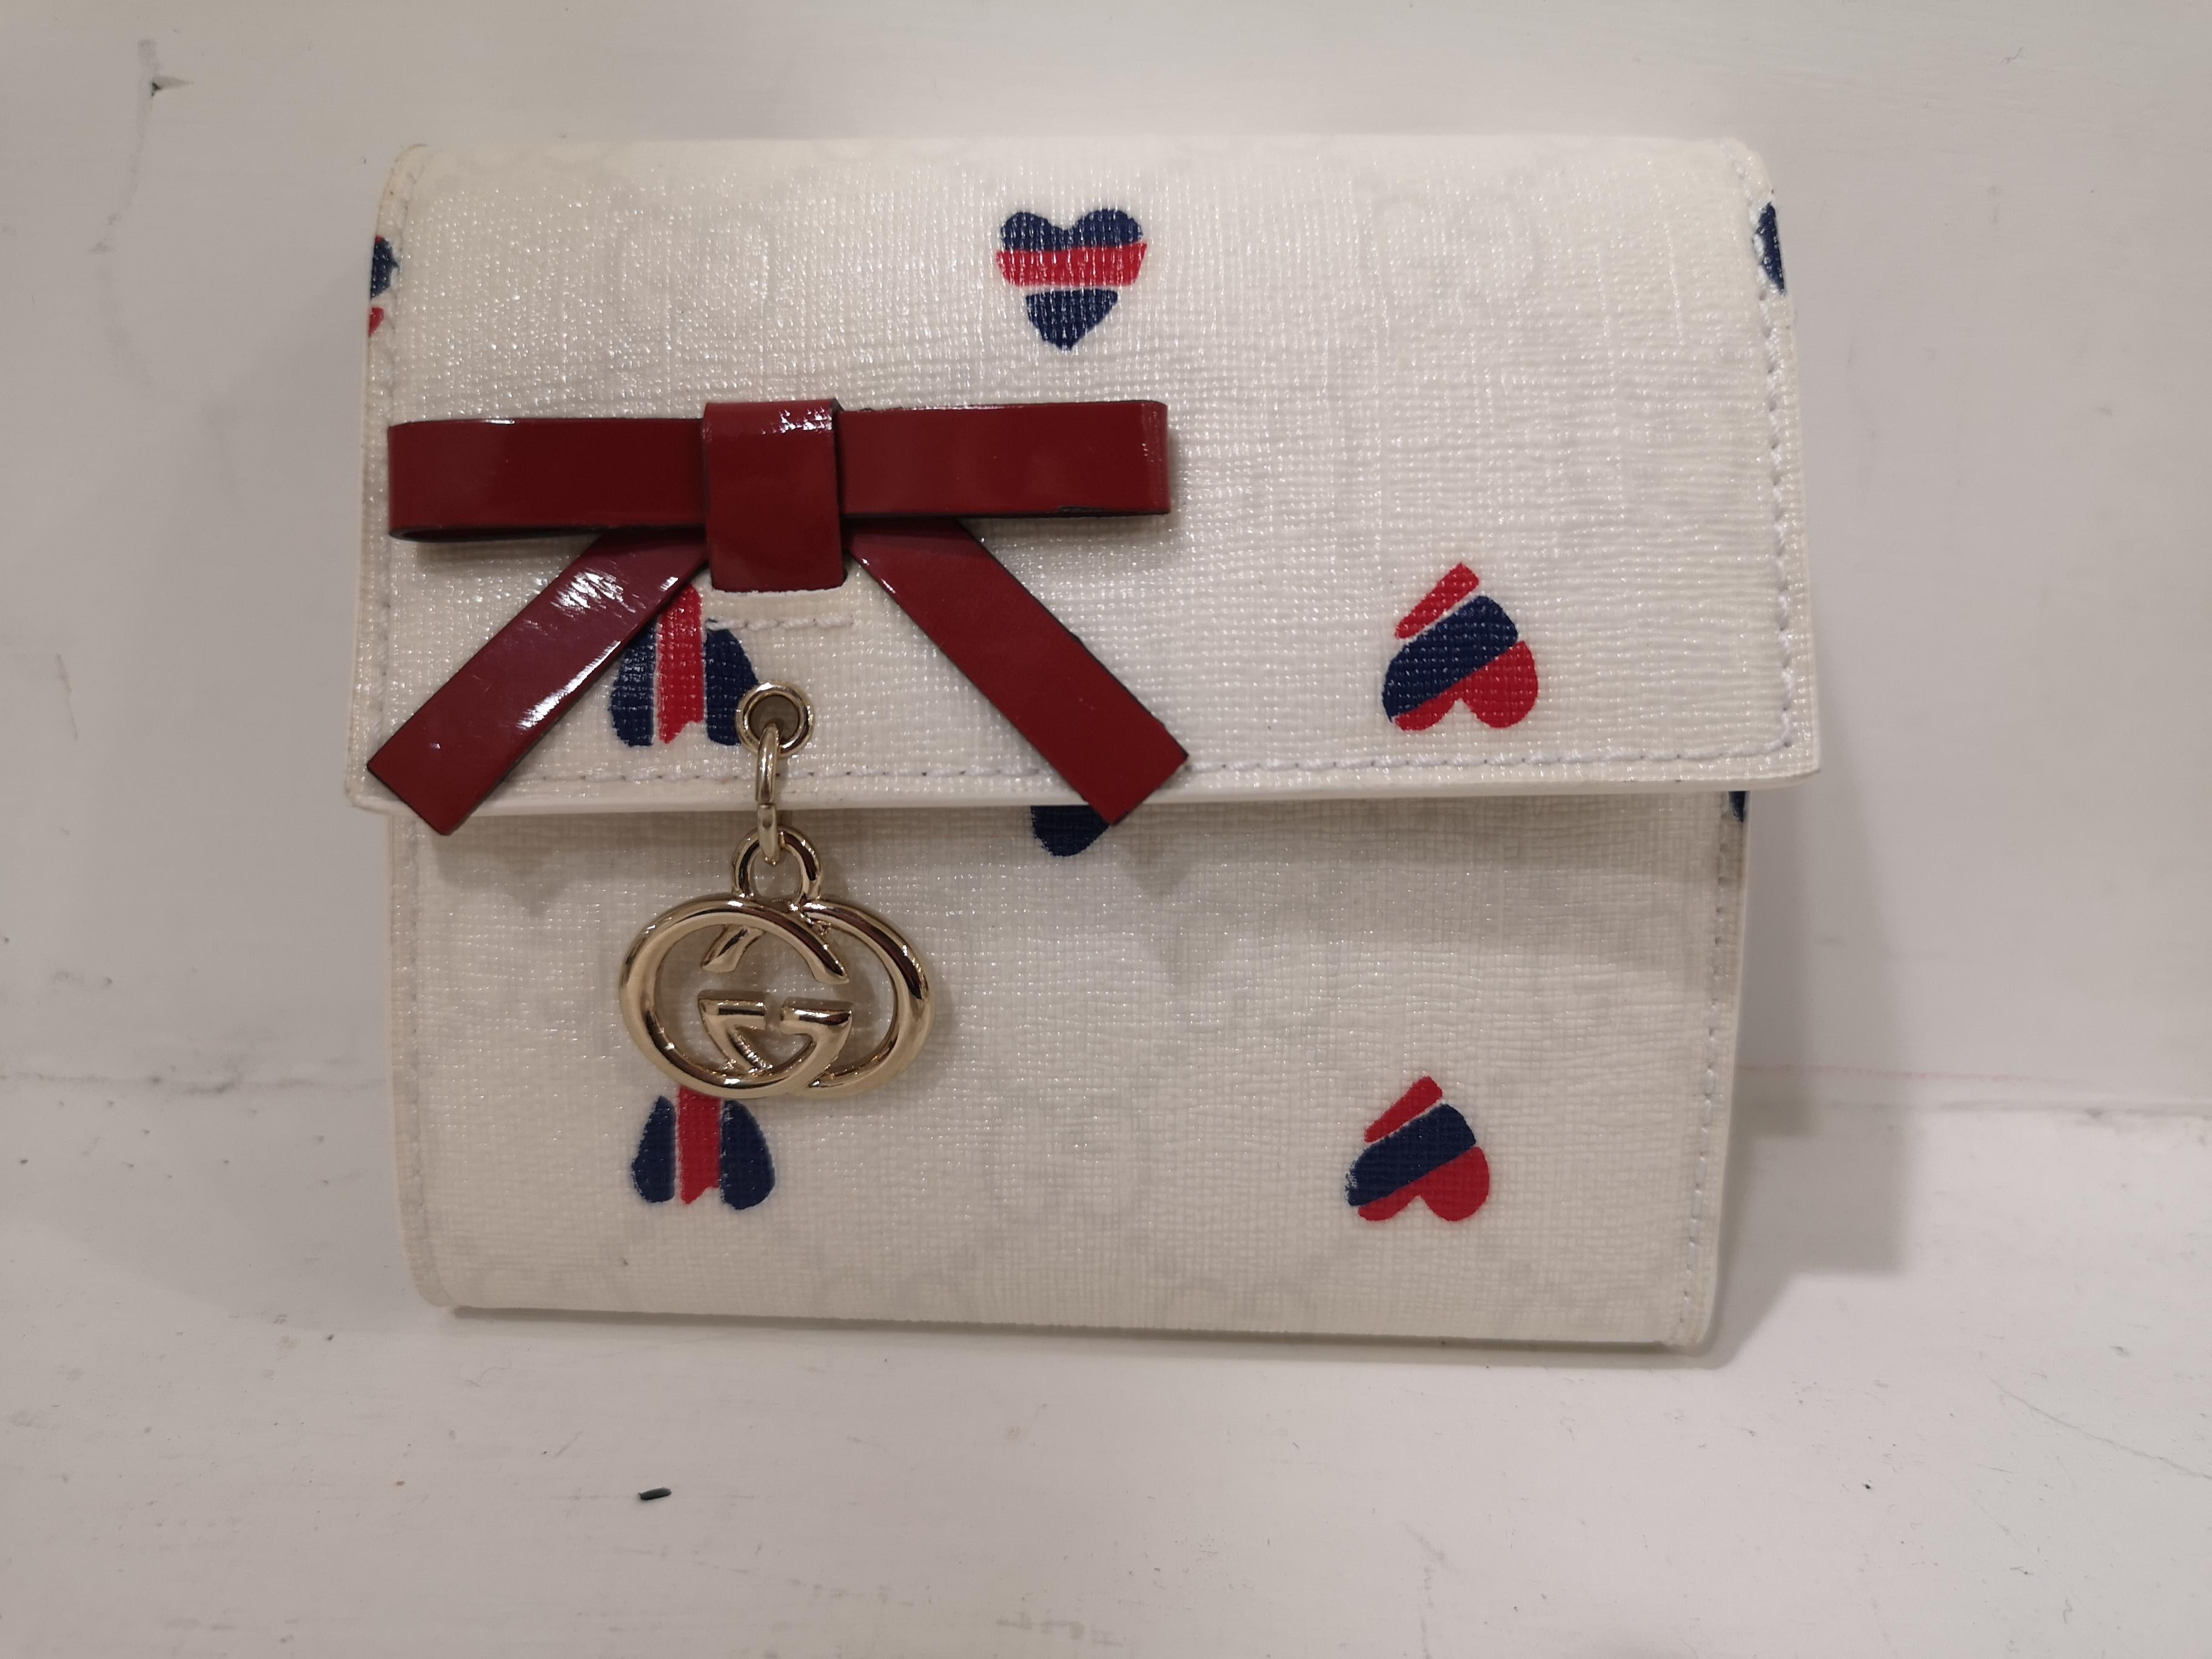 Gucci white heart wallet NWOT
Gucci white leather red and blue hearts wallet embellished on the front with a red patent bow 
still with dust and box
measurements:  11 * 11 cm